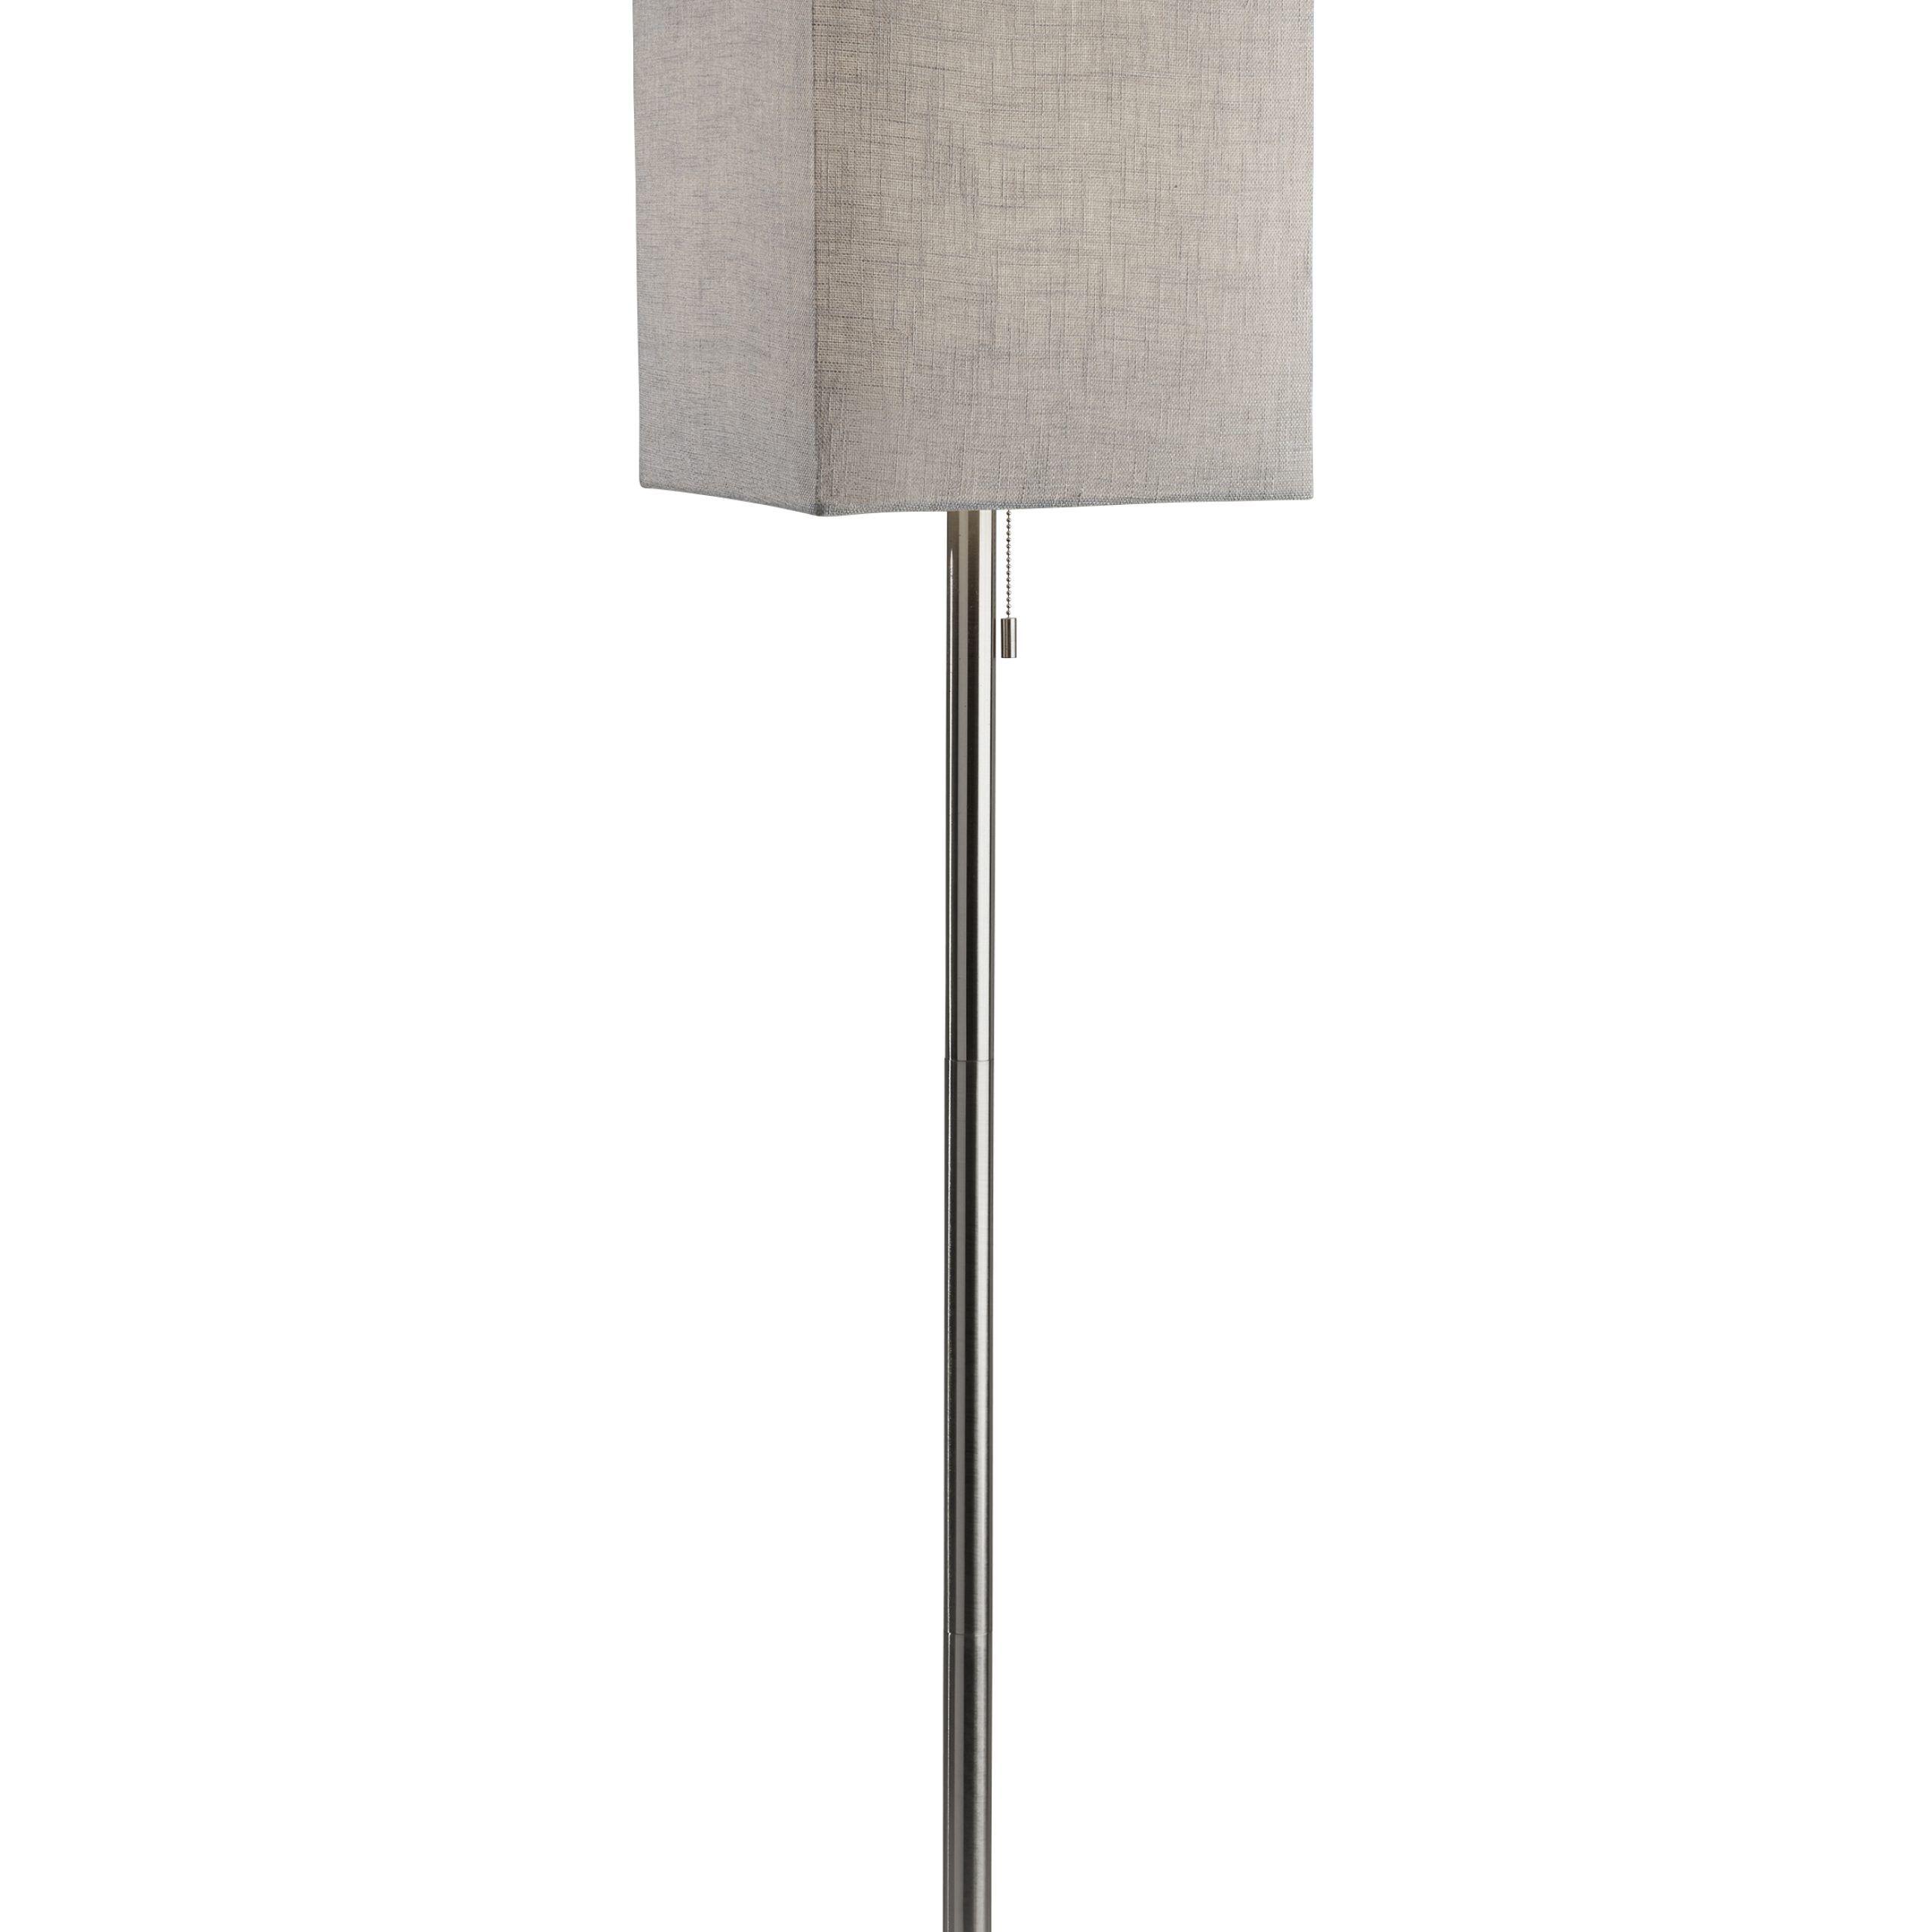 Adesso Estelle Floor Lamp, Brushed Steel, Light Grey Textured Fabric Shade  – Walmart Intended For Textured Fabric Floor Lamps (View 8 of 20)